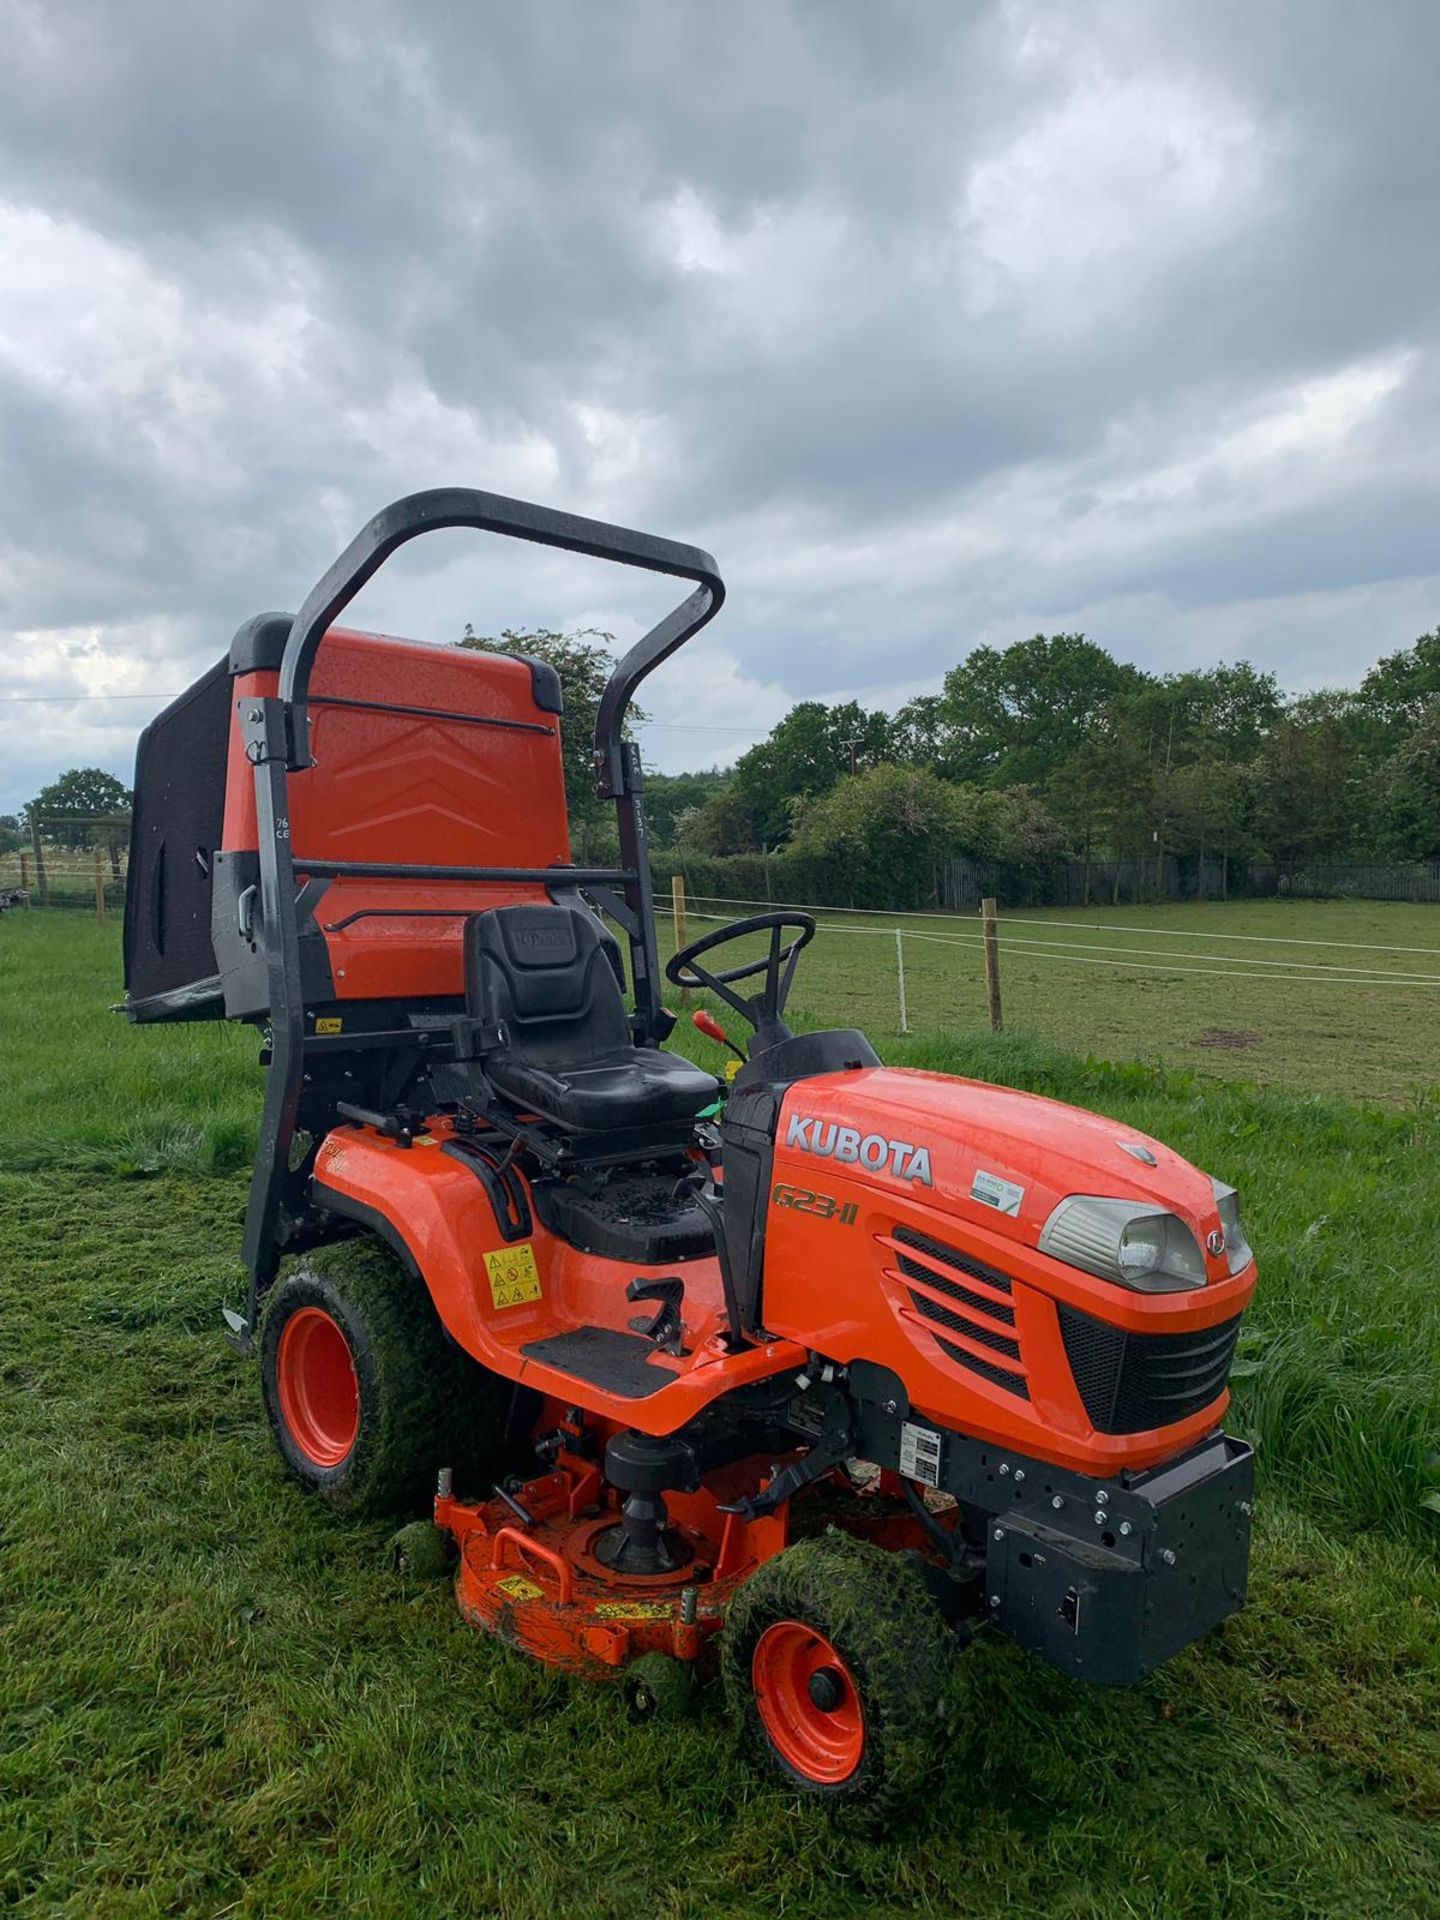 2015 KUBOTA G23-II TWIN CUT LAWN MOWER WITH ROLL BAR, HYDRAULIC TIP, LOW DUMP COLLECTOR - 28 HOURS!! - Image 4 of 15